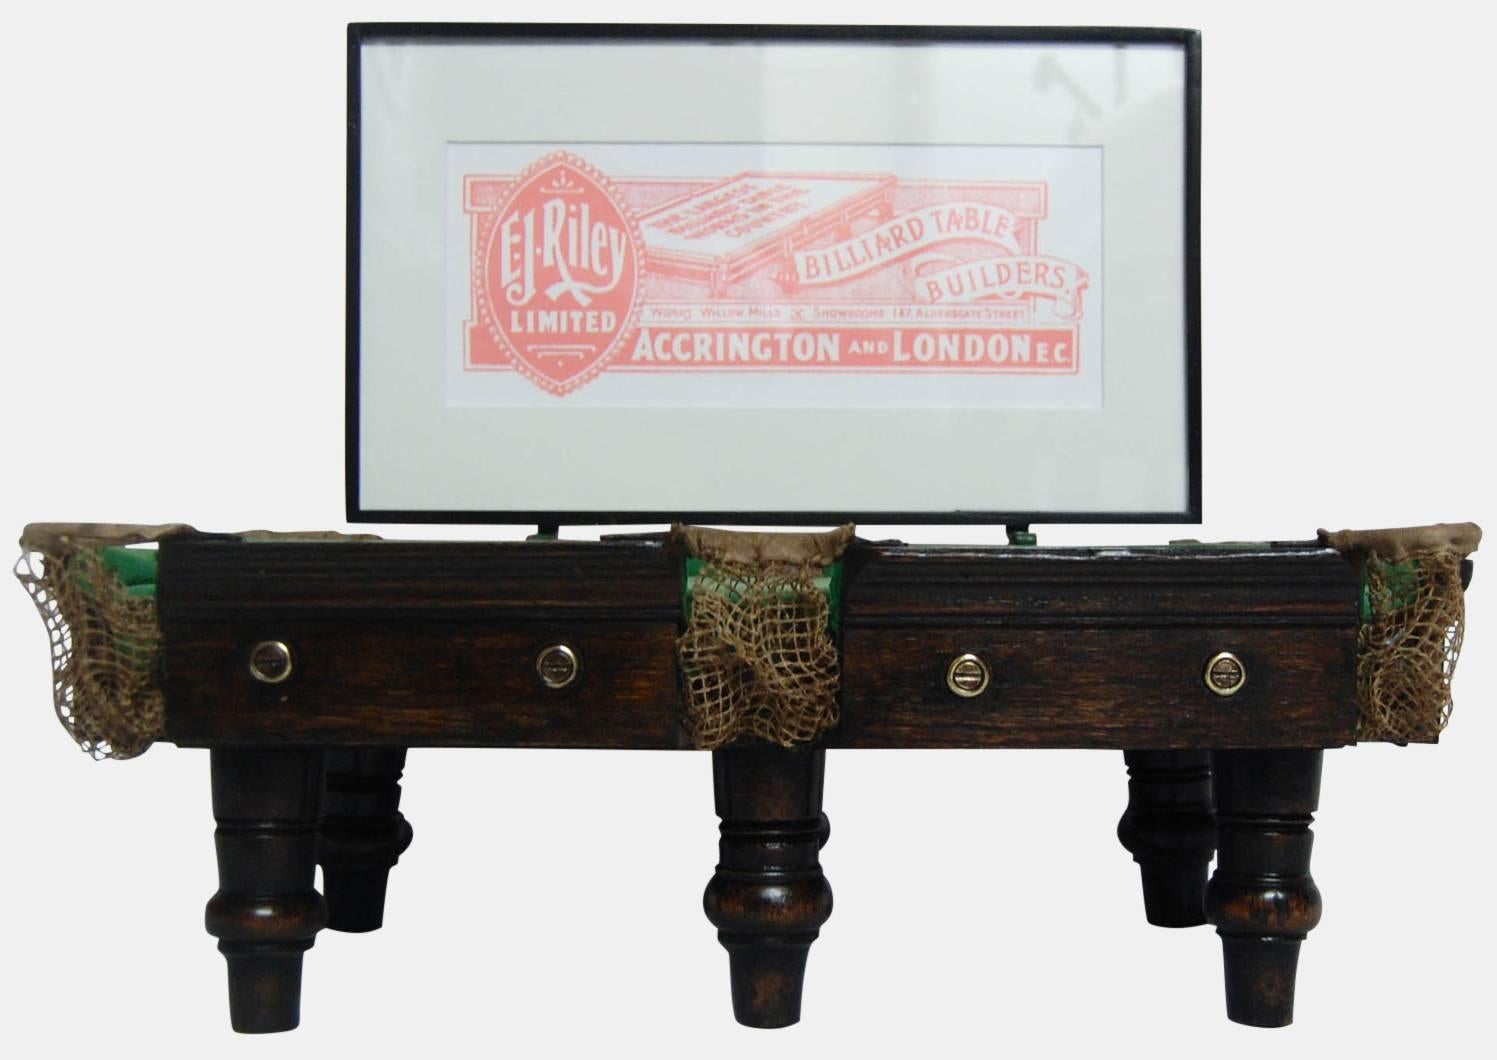 Early 20th Century Miniature Billiards Table Shop Advertising display for E.J. Riley c1920